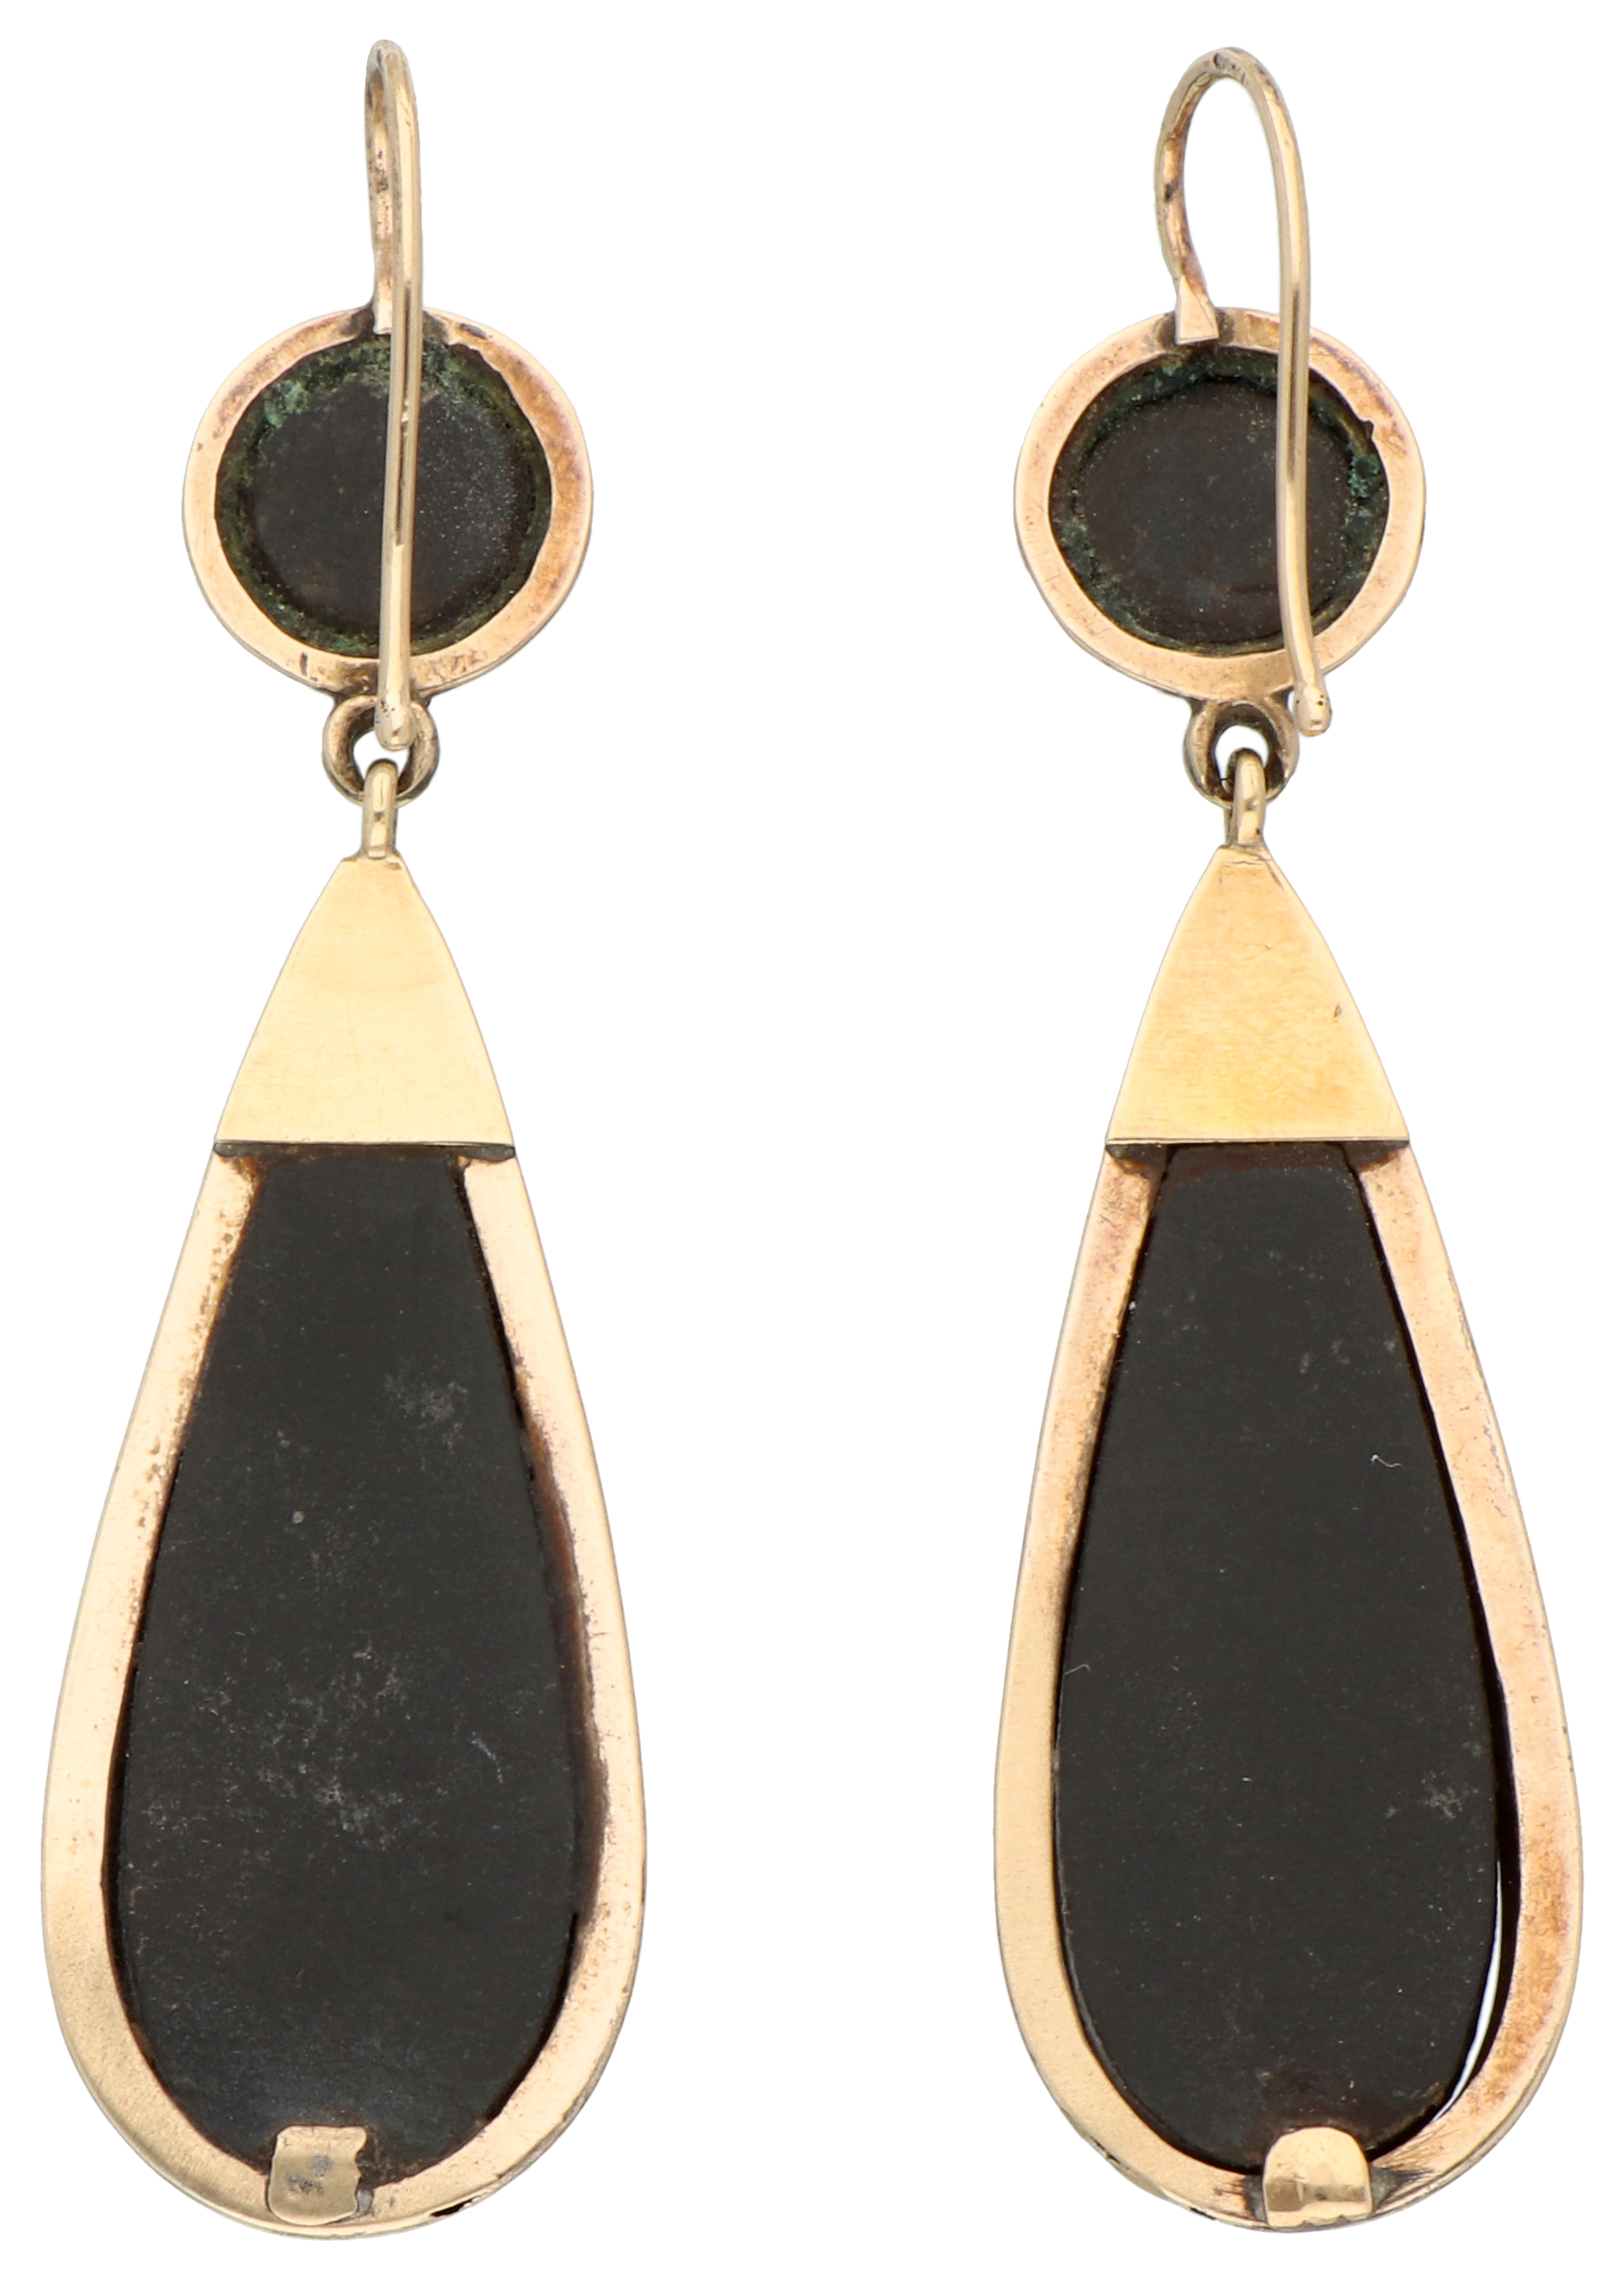 No Reserve - 12K yellow gold earrings with pietra dura. - Image 2 of 2